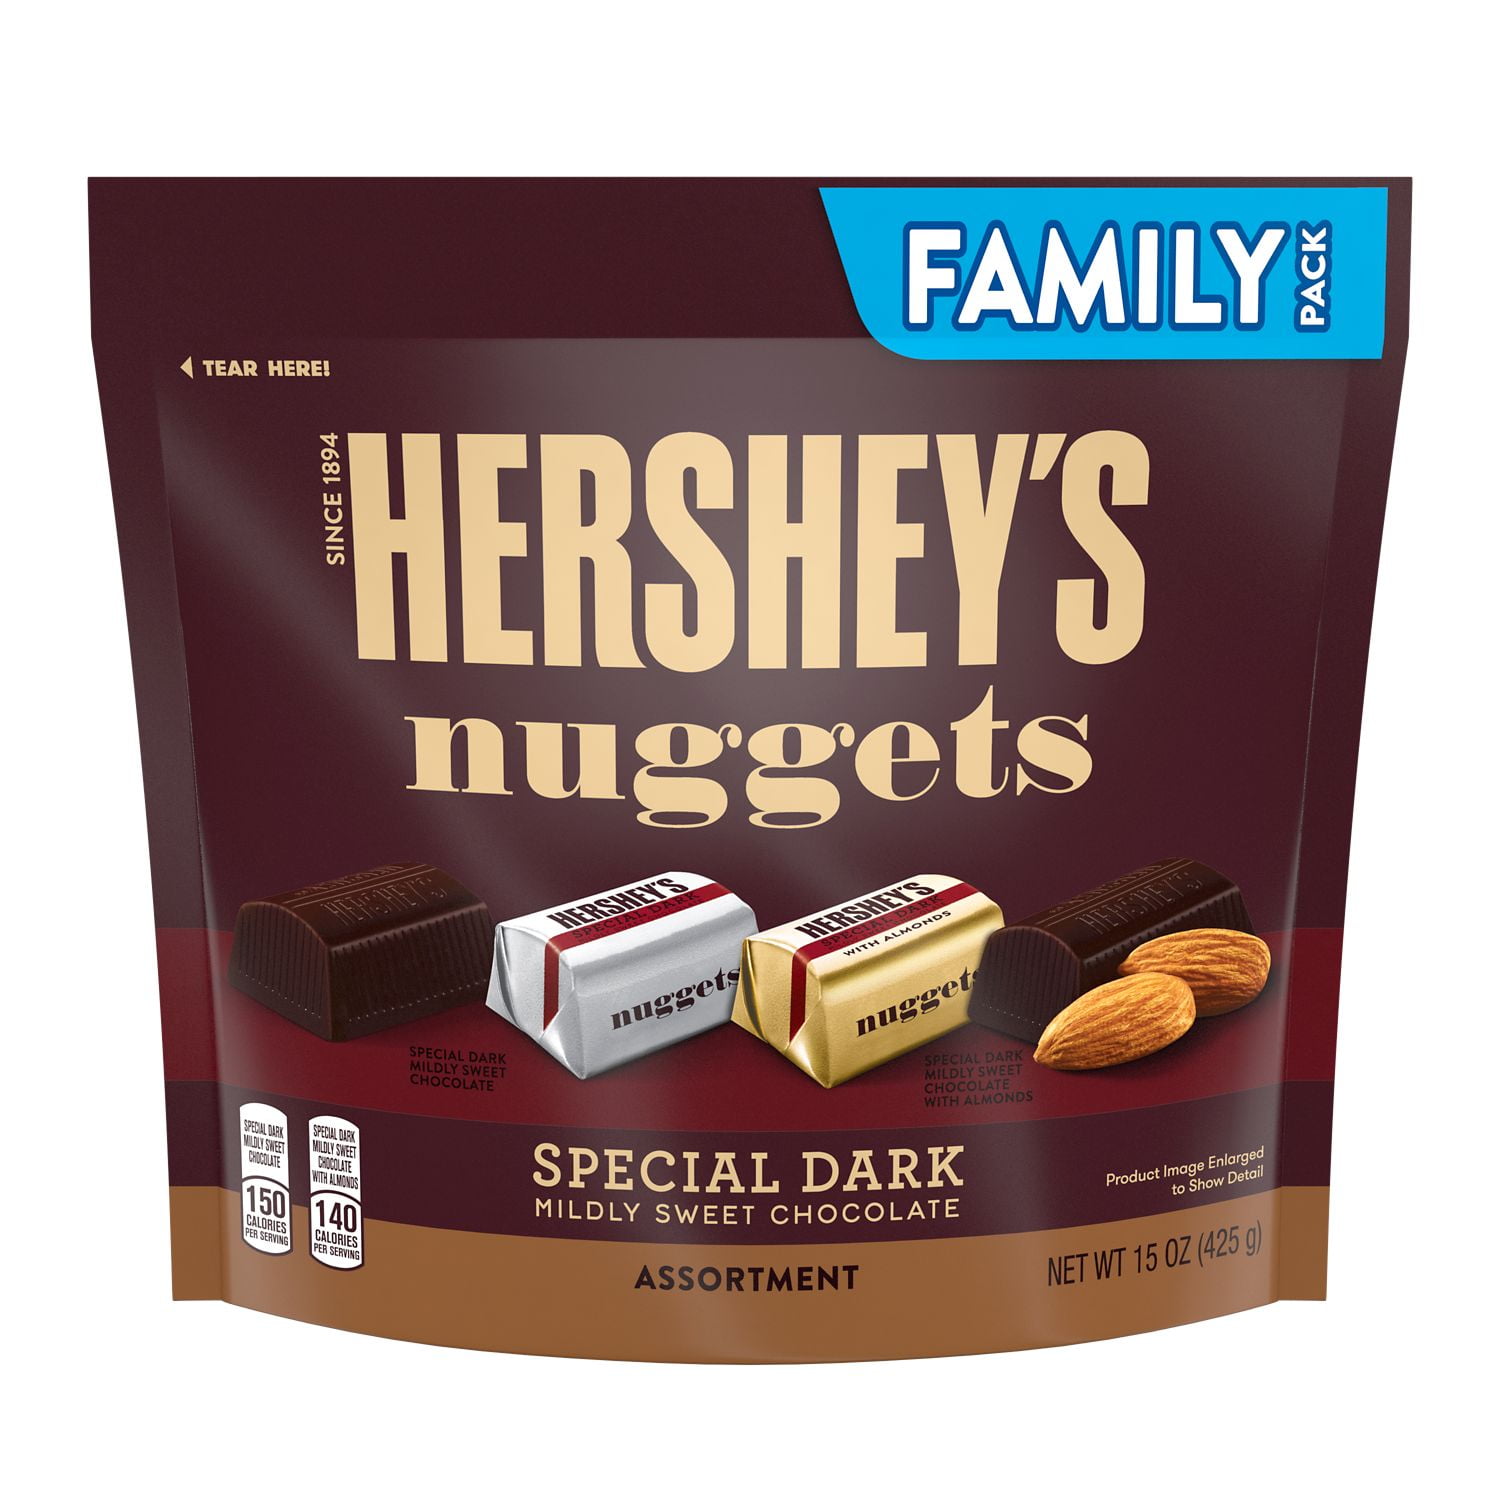 Hershey's NUGGETS Special Dark Chocolate Assorted Candy, Big Pack, 15oz Bag